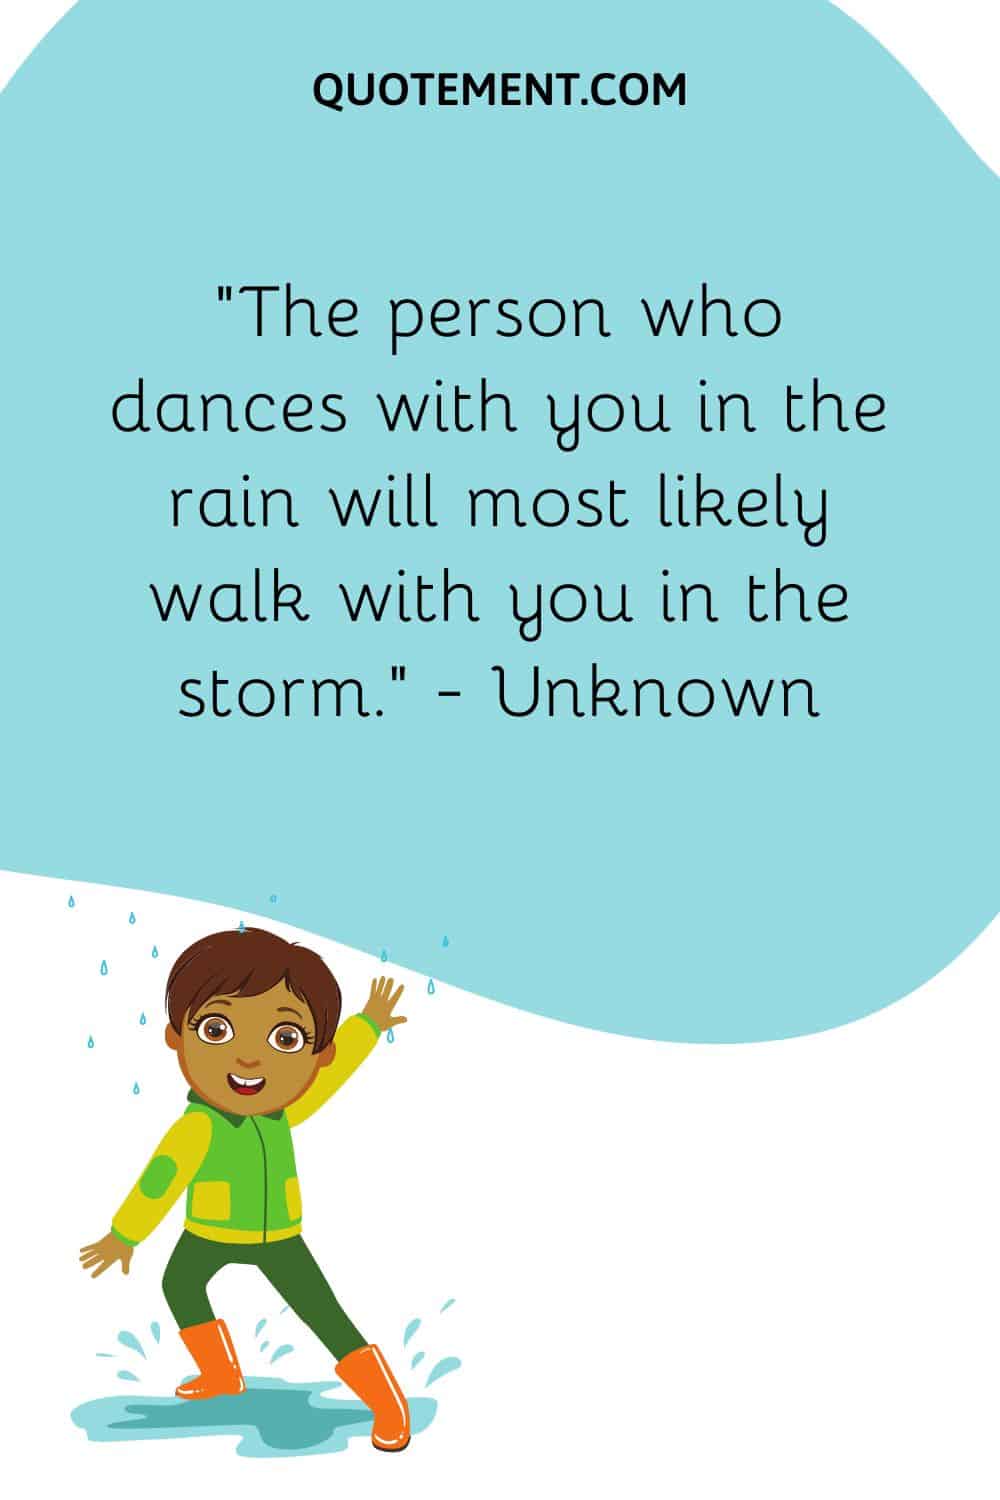 The person who dances with you in the rain will most likely walk with you in the storm